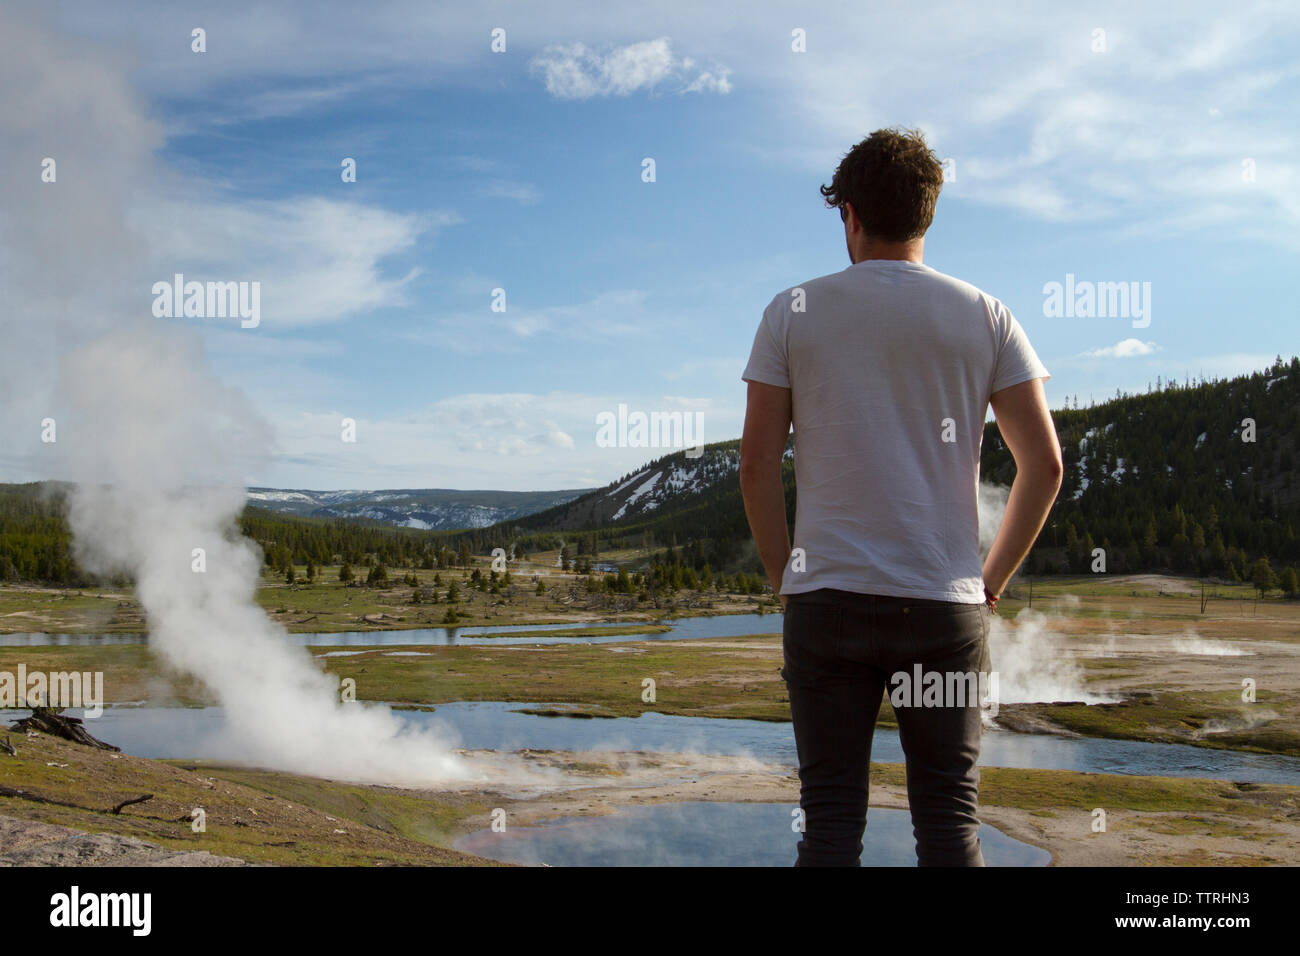 Rear view of hiker looking at steam coming out from hot springs at Yellowstone National Park against sky Stock Photo